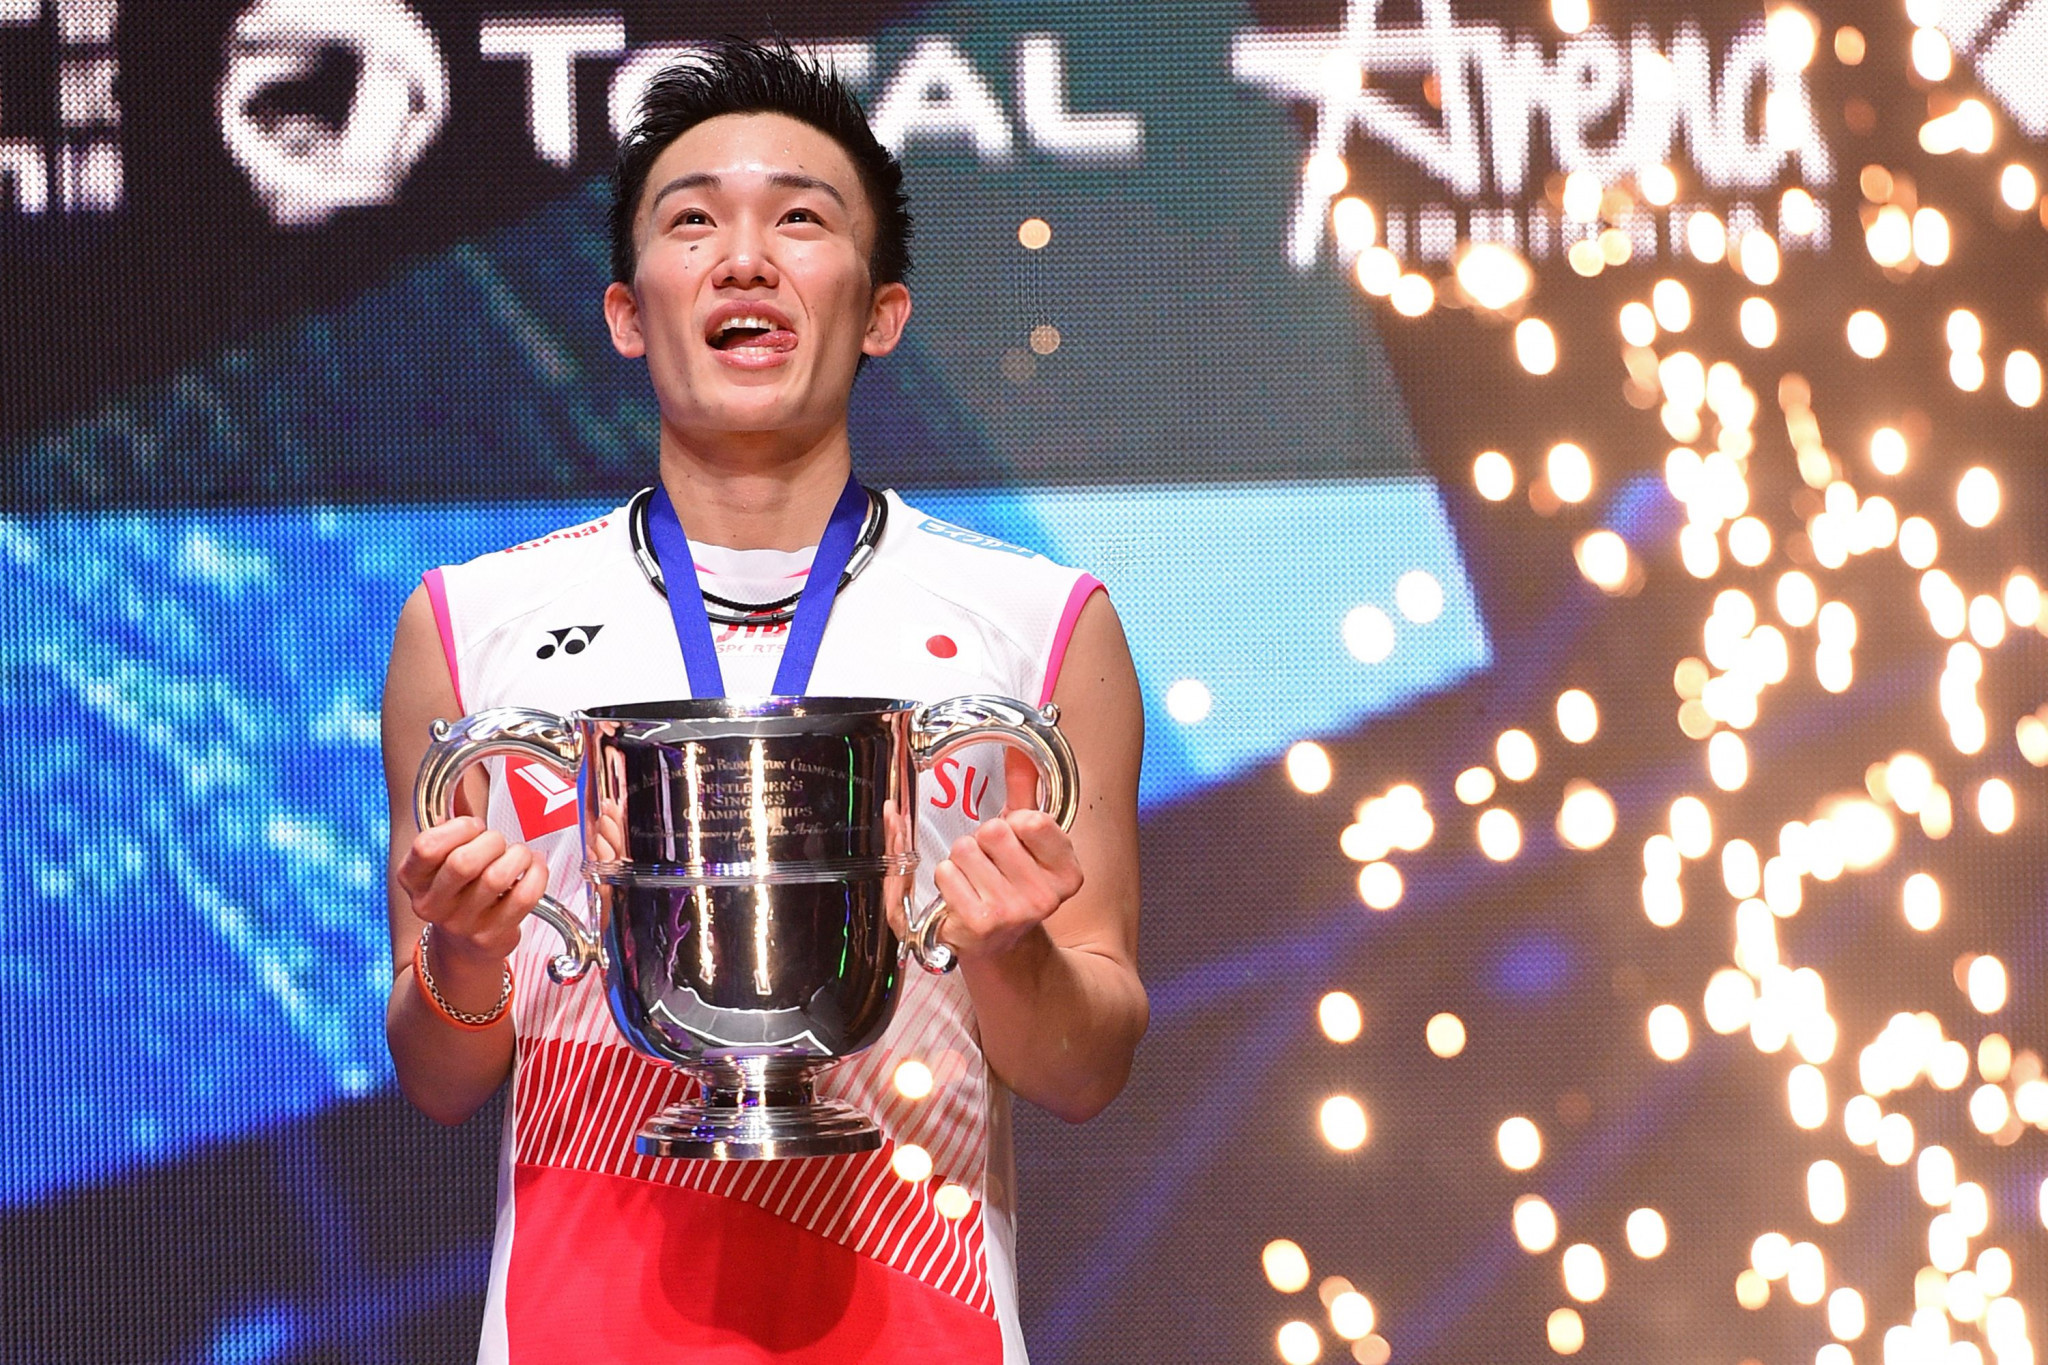 Momota and Chen win singles titles at All England Open Badminton Championships